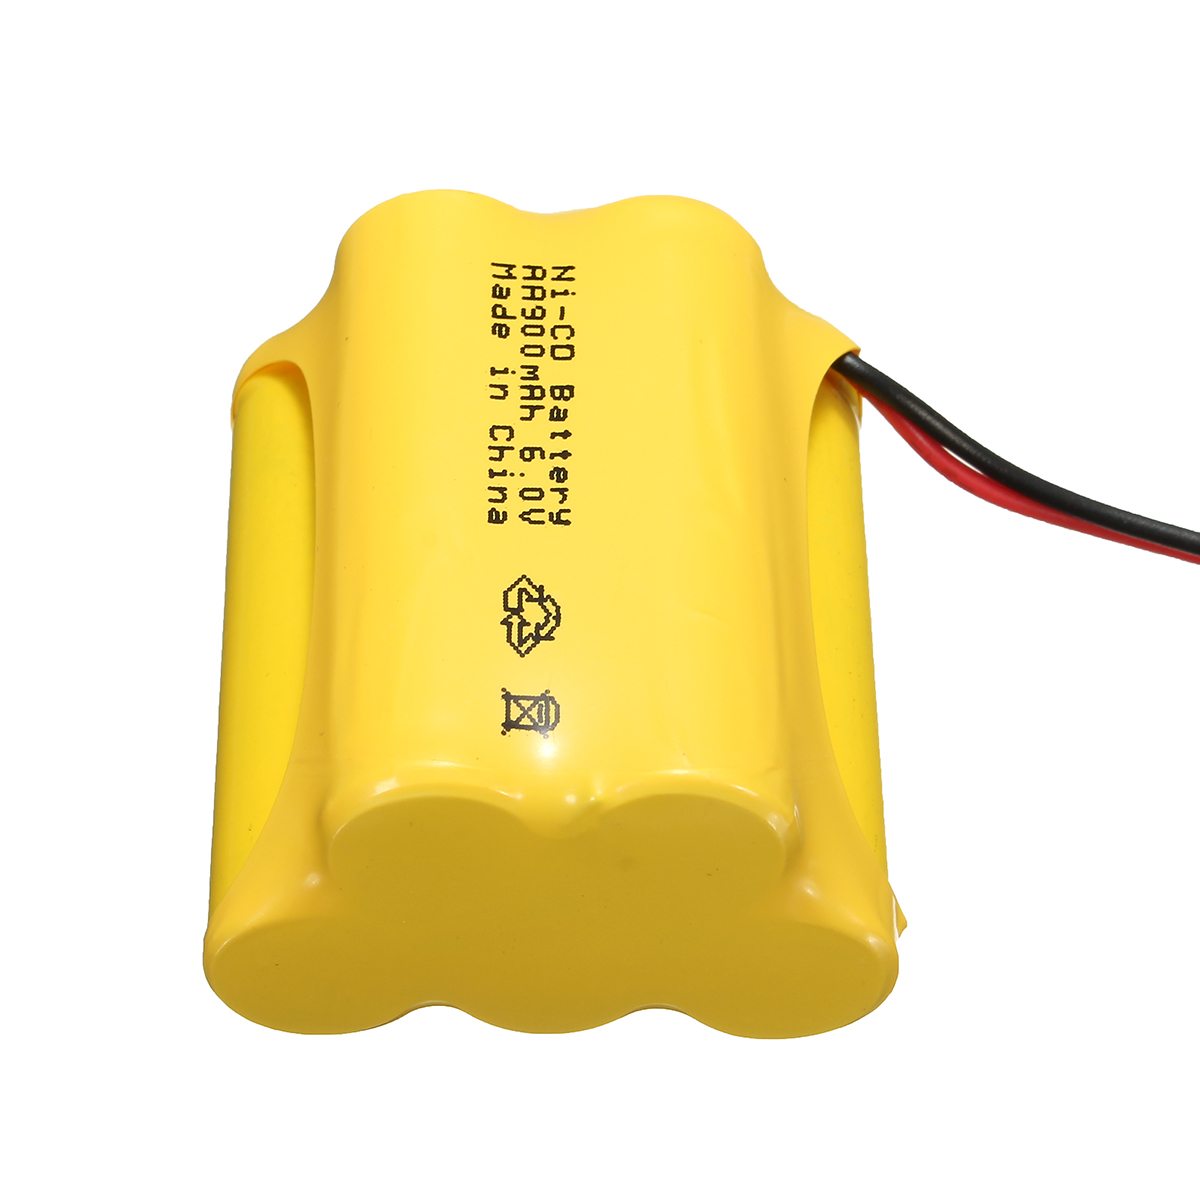 Ni-Cd-6V-900mAh-JST-SYP-Plug-Rechargeable-Battery-Solar-Light-For-Racing-Remote-Control-Car-1299833-5